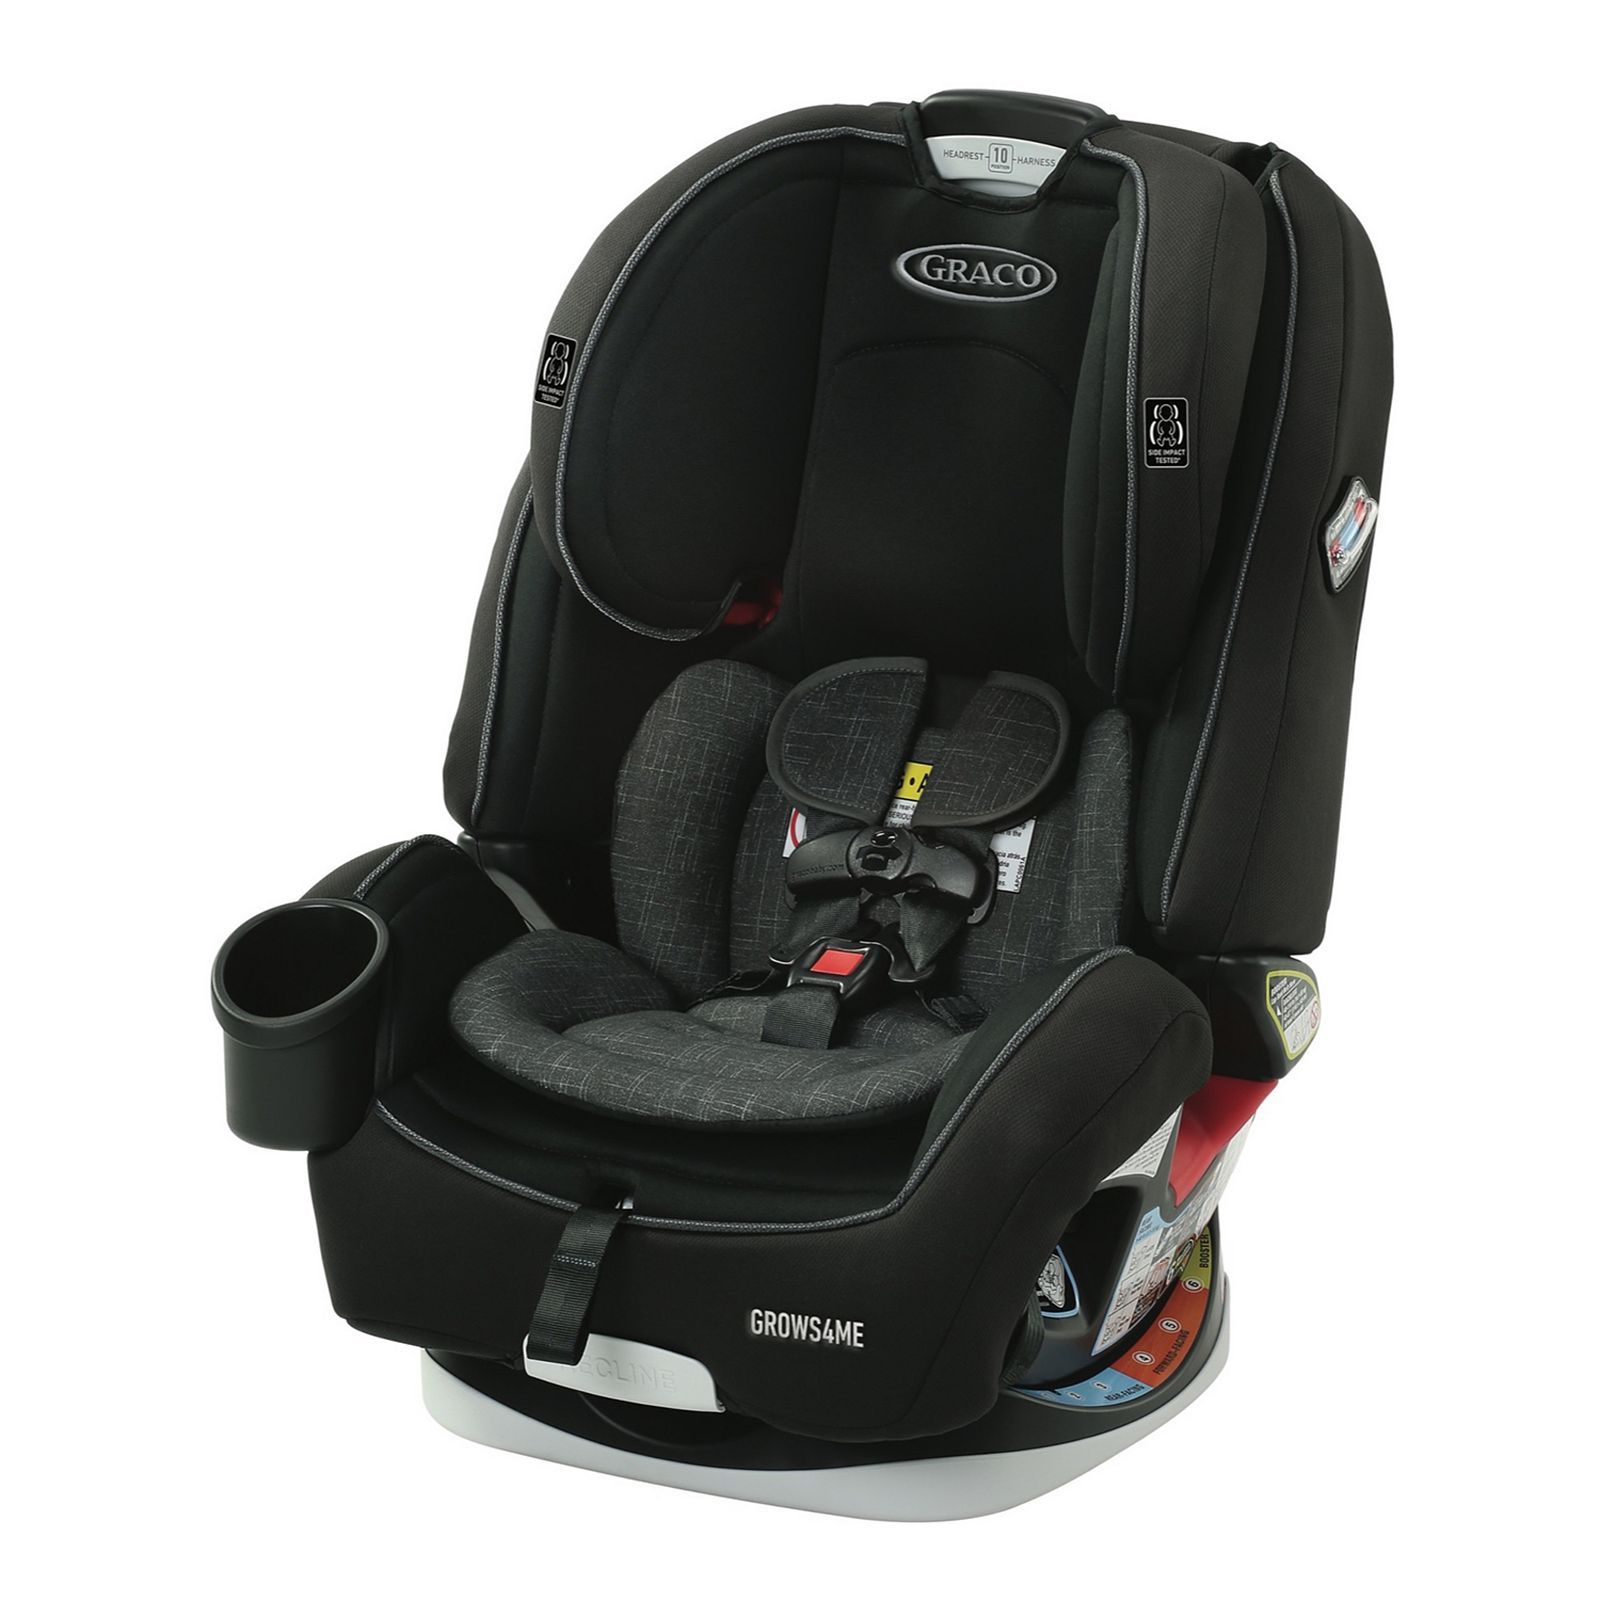 Graco Grows4Me 4-in-1 Convertible Car Seat, Multicolor | Kohl's